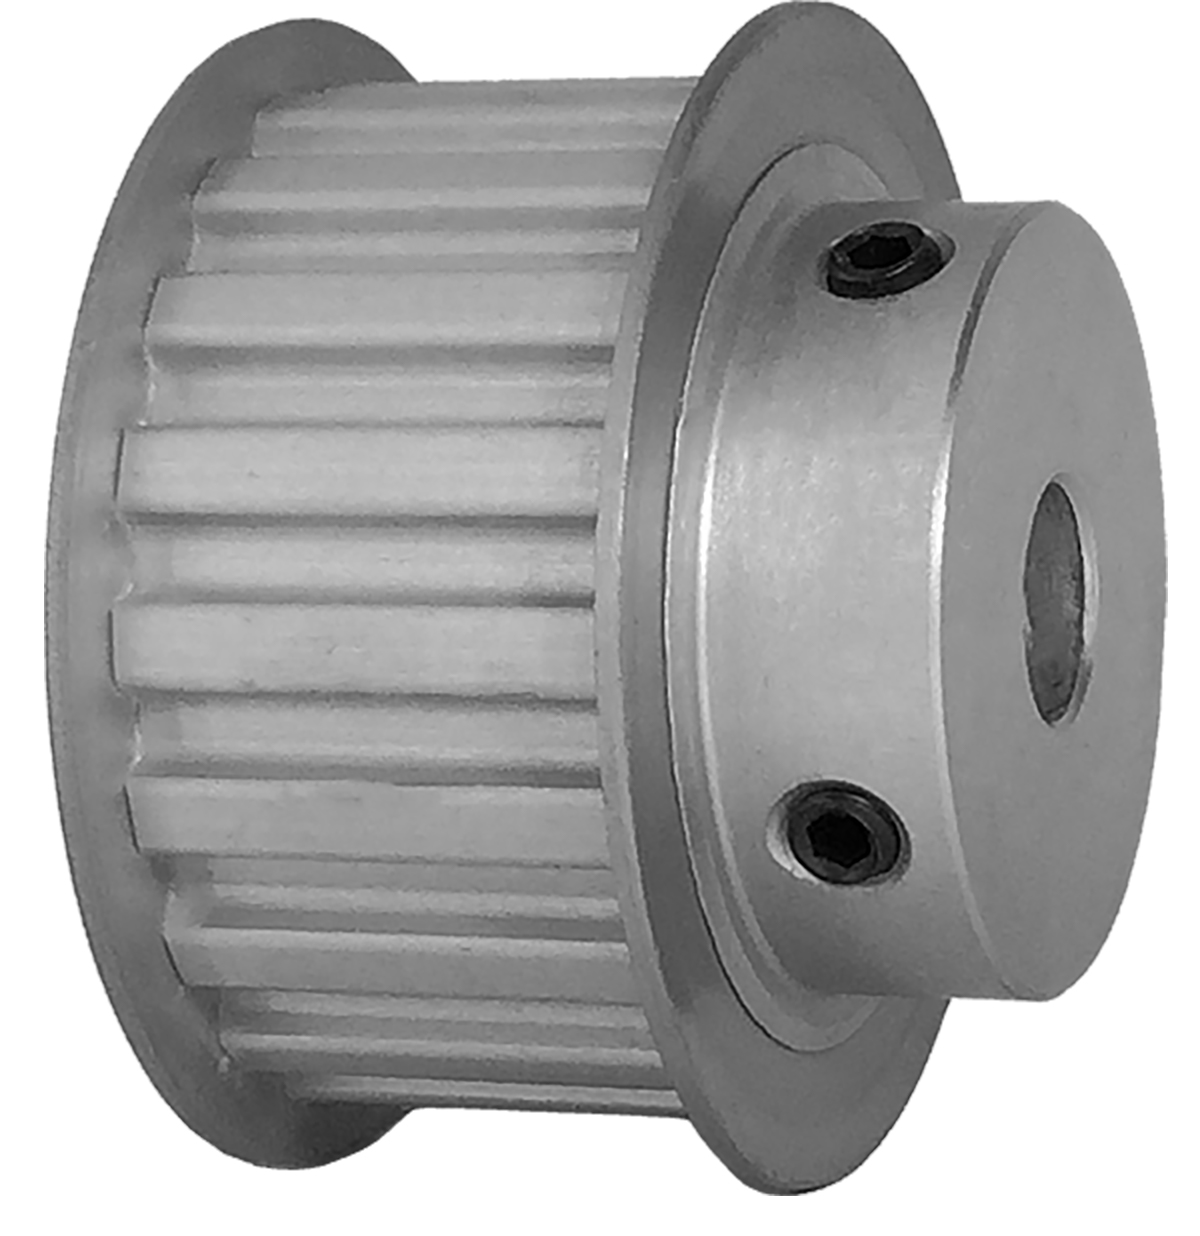 19L100-6FA6 - Aluminum Imperial Pitch Pulleys